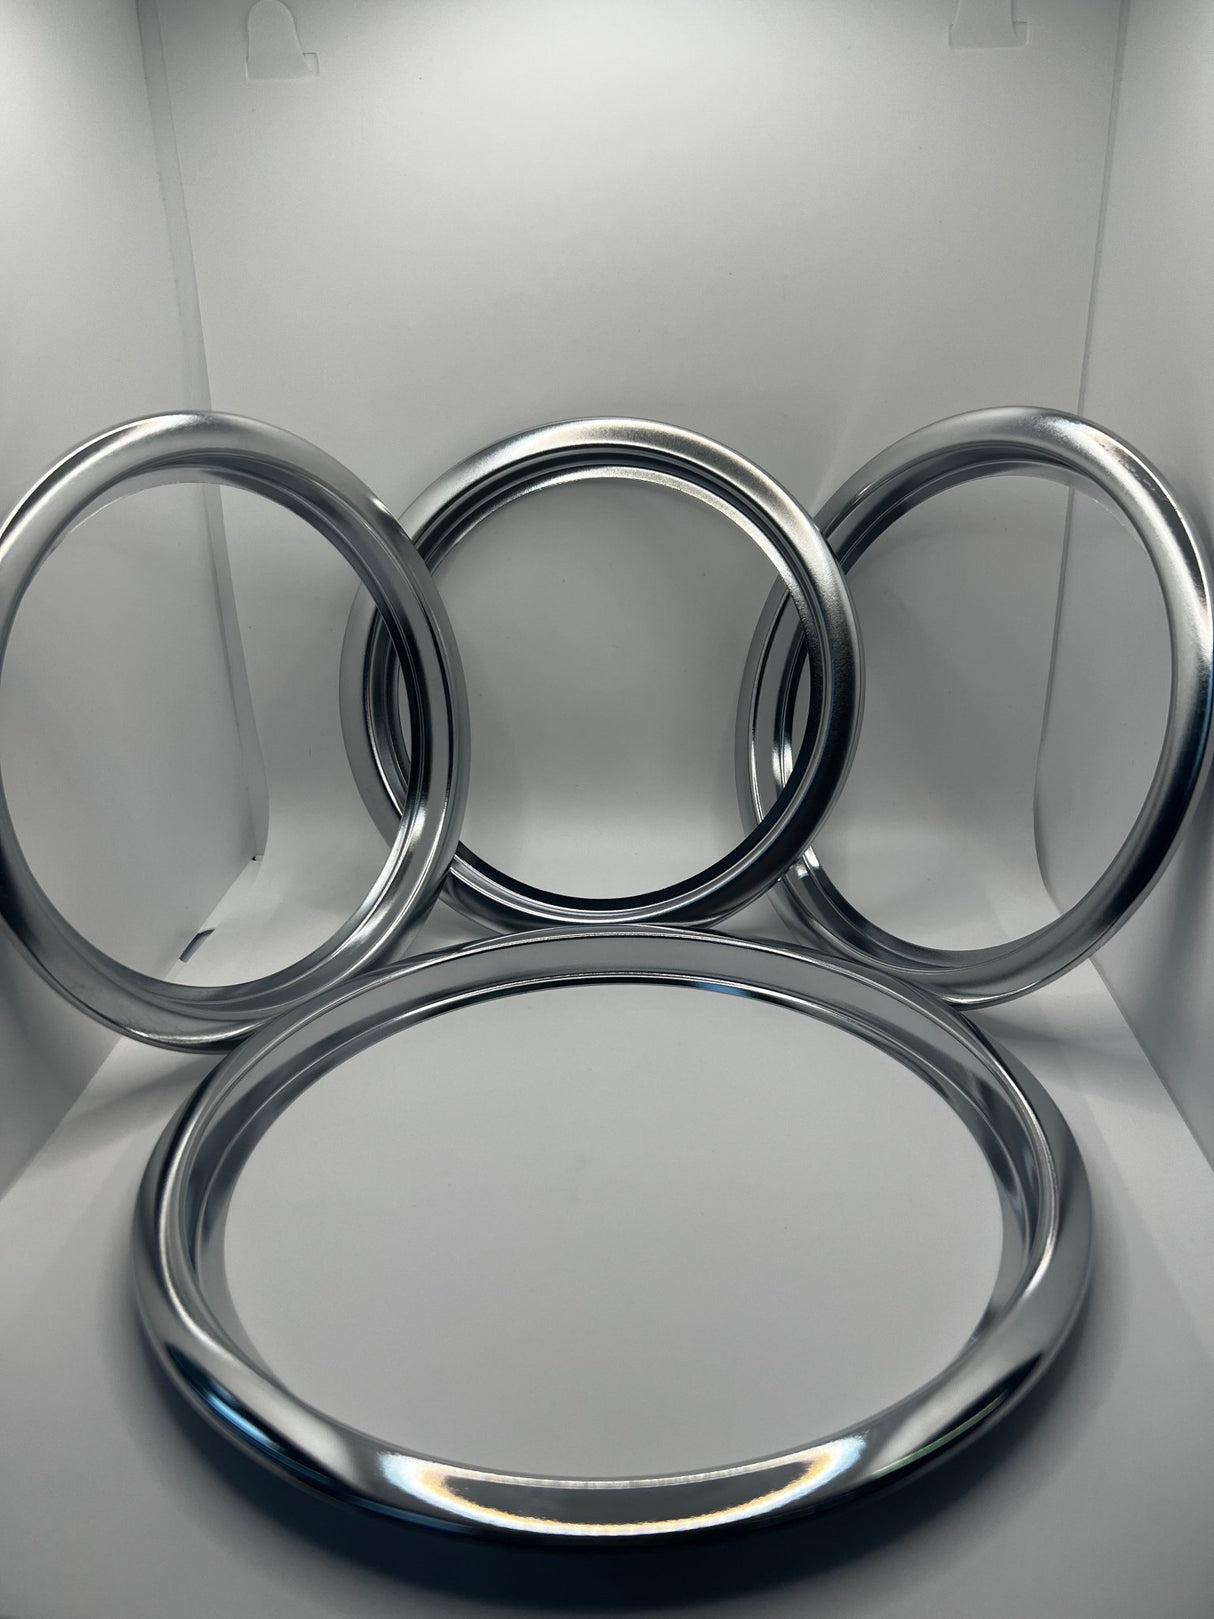 CHEF/WESTINGHOUSE TRIM RINGS 3 x 6" (2799) & 1 x 8" (2800) - My Oven Spares-Chef-2799x3 2800x1-1